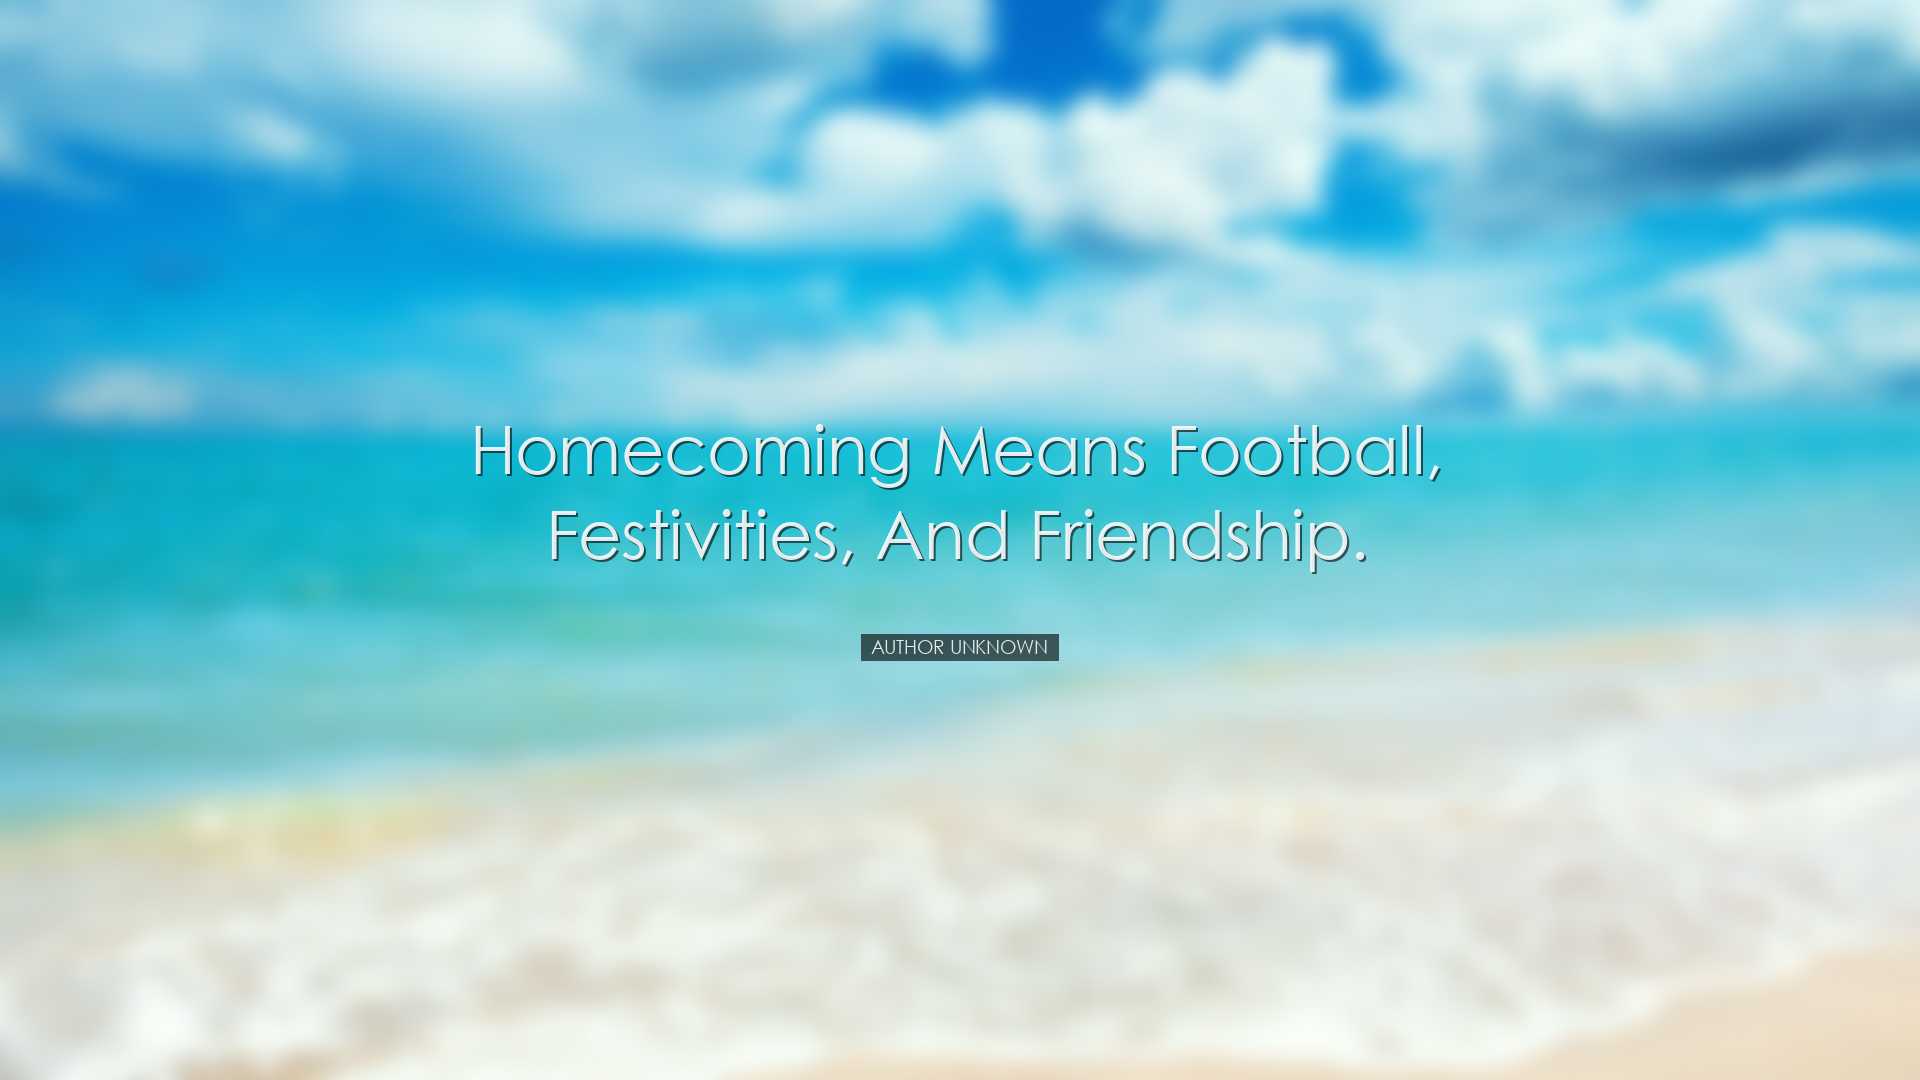 Homecoming means football, festivities, and friendship. - Author U